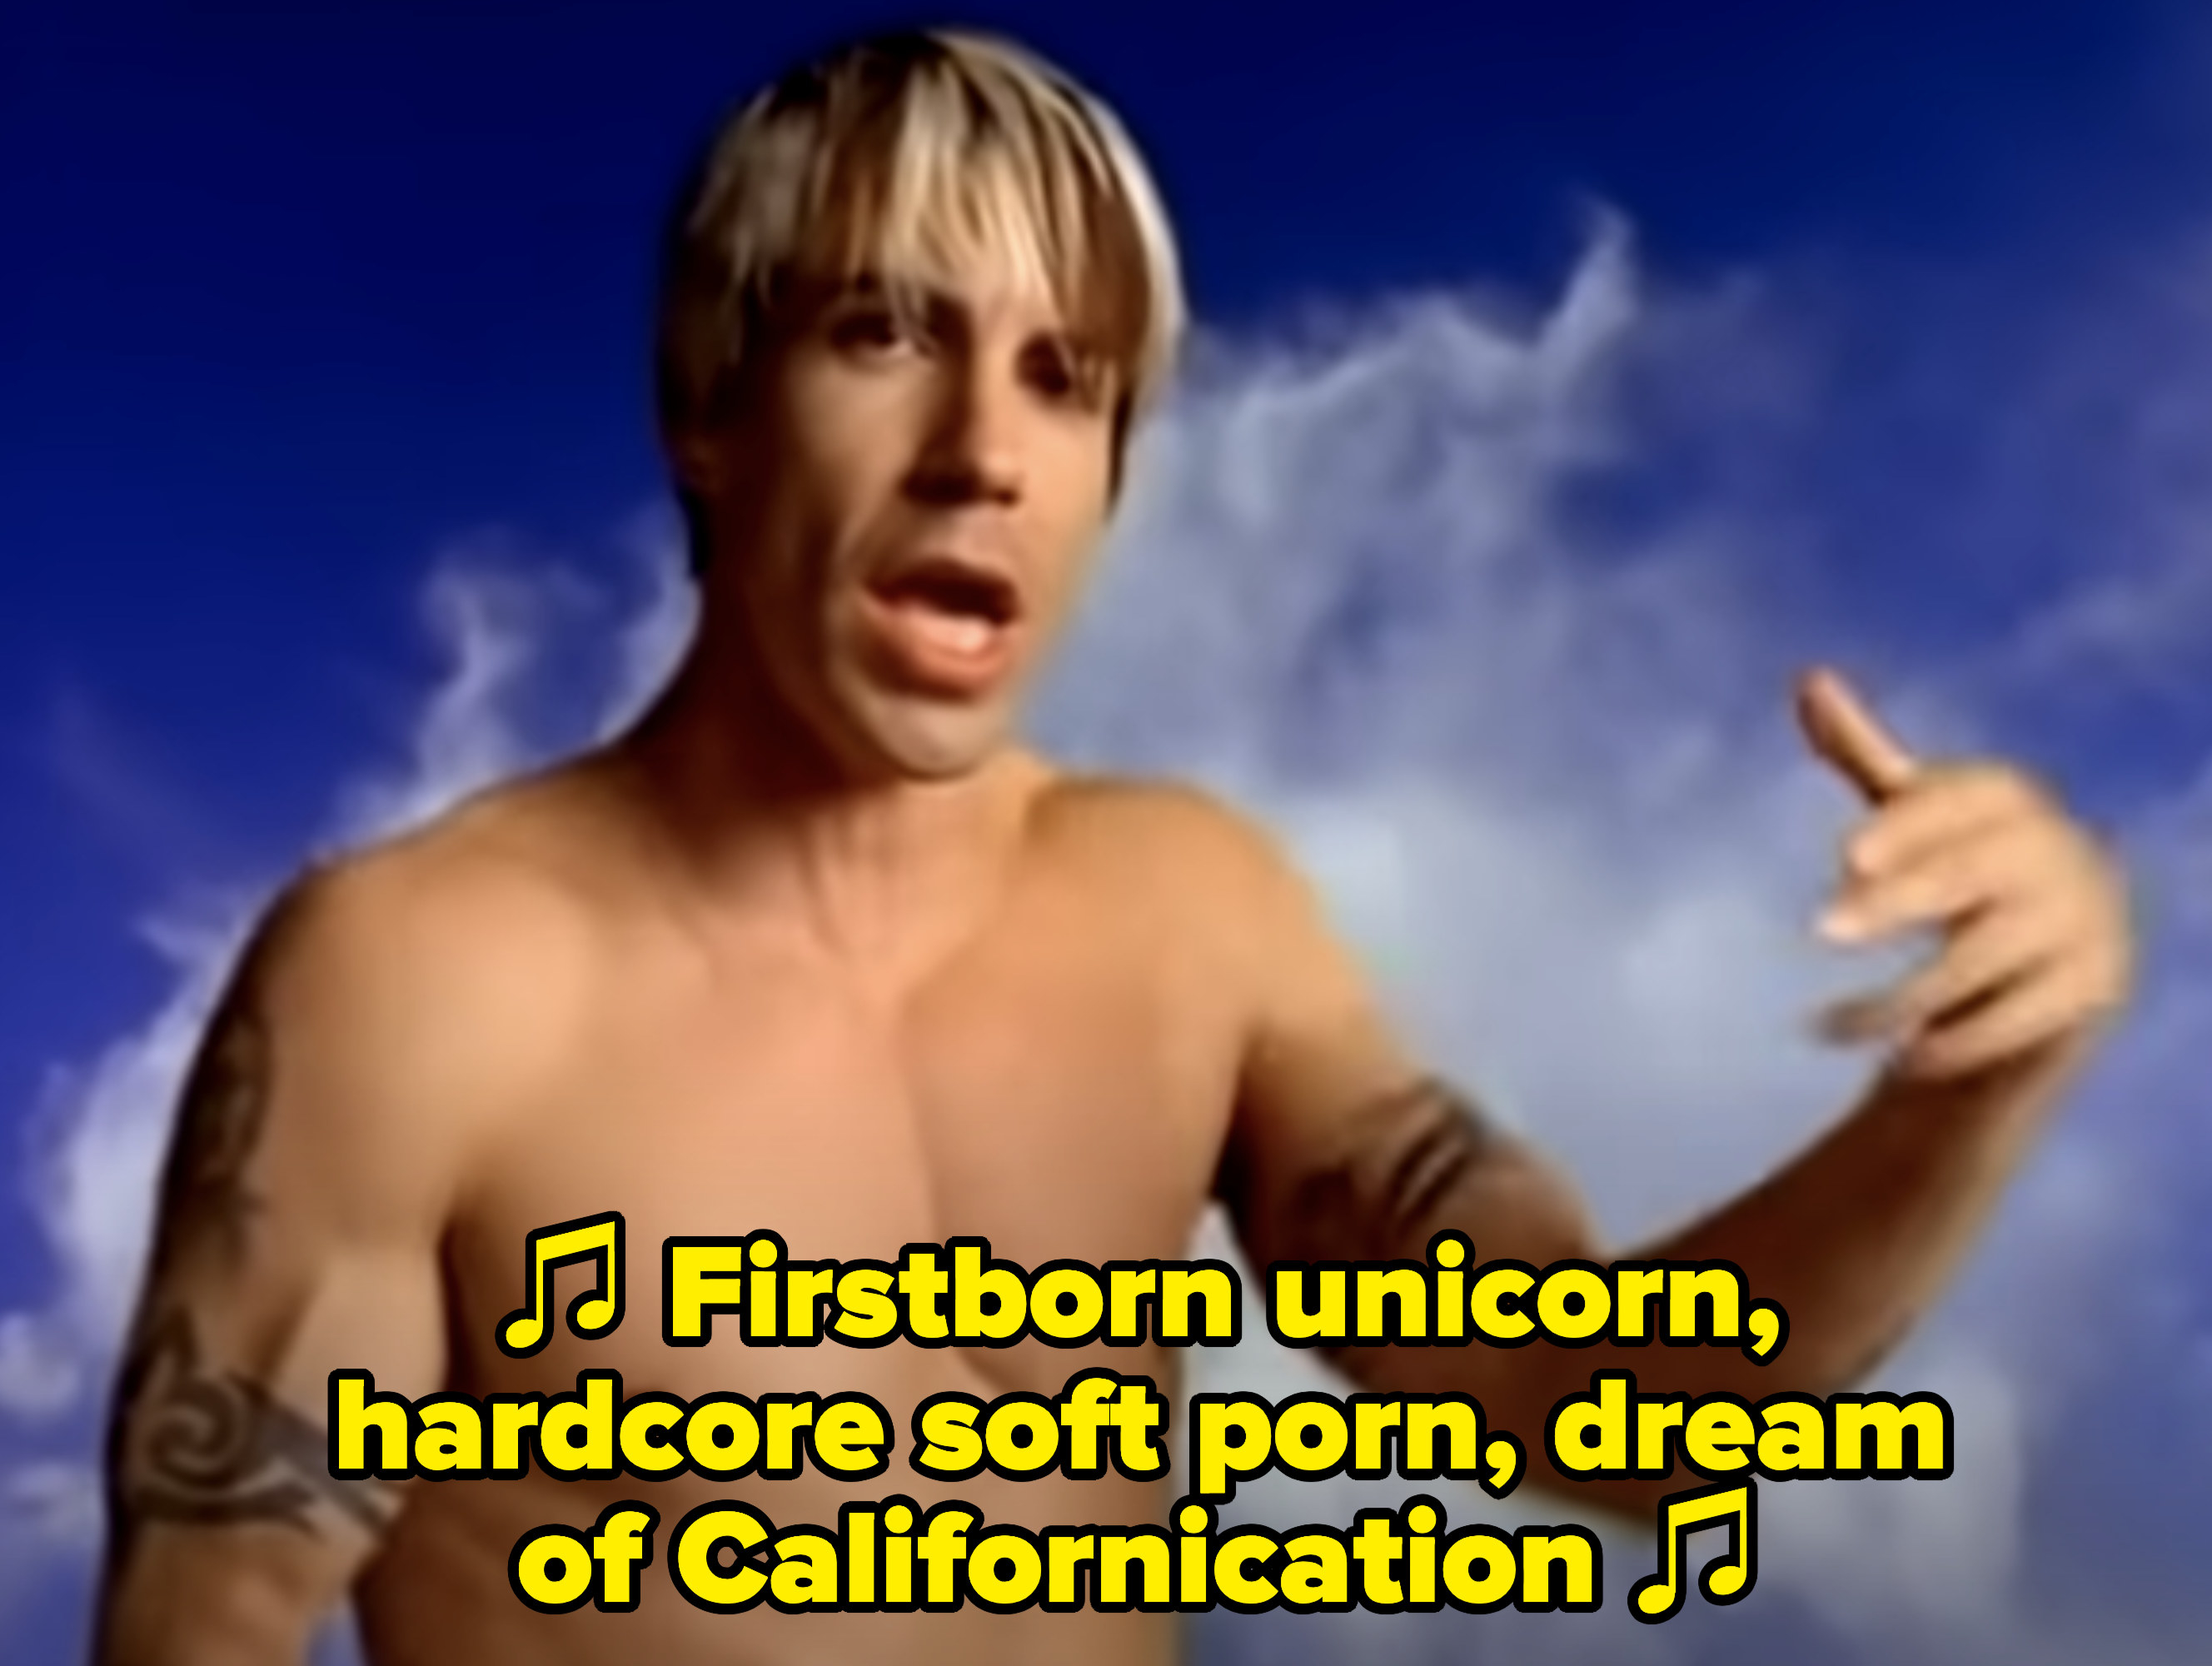 Red Hot Chili Peppers singing: &quot;Firstborn unicorn, hardcore soft porn, dream of Californication&quot;